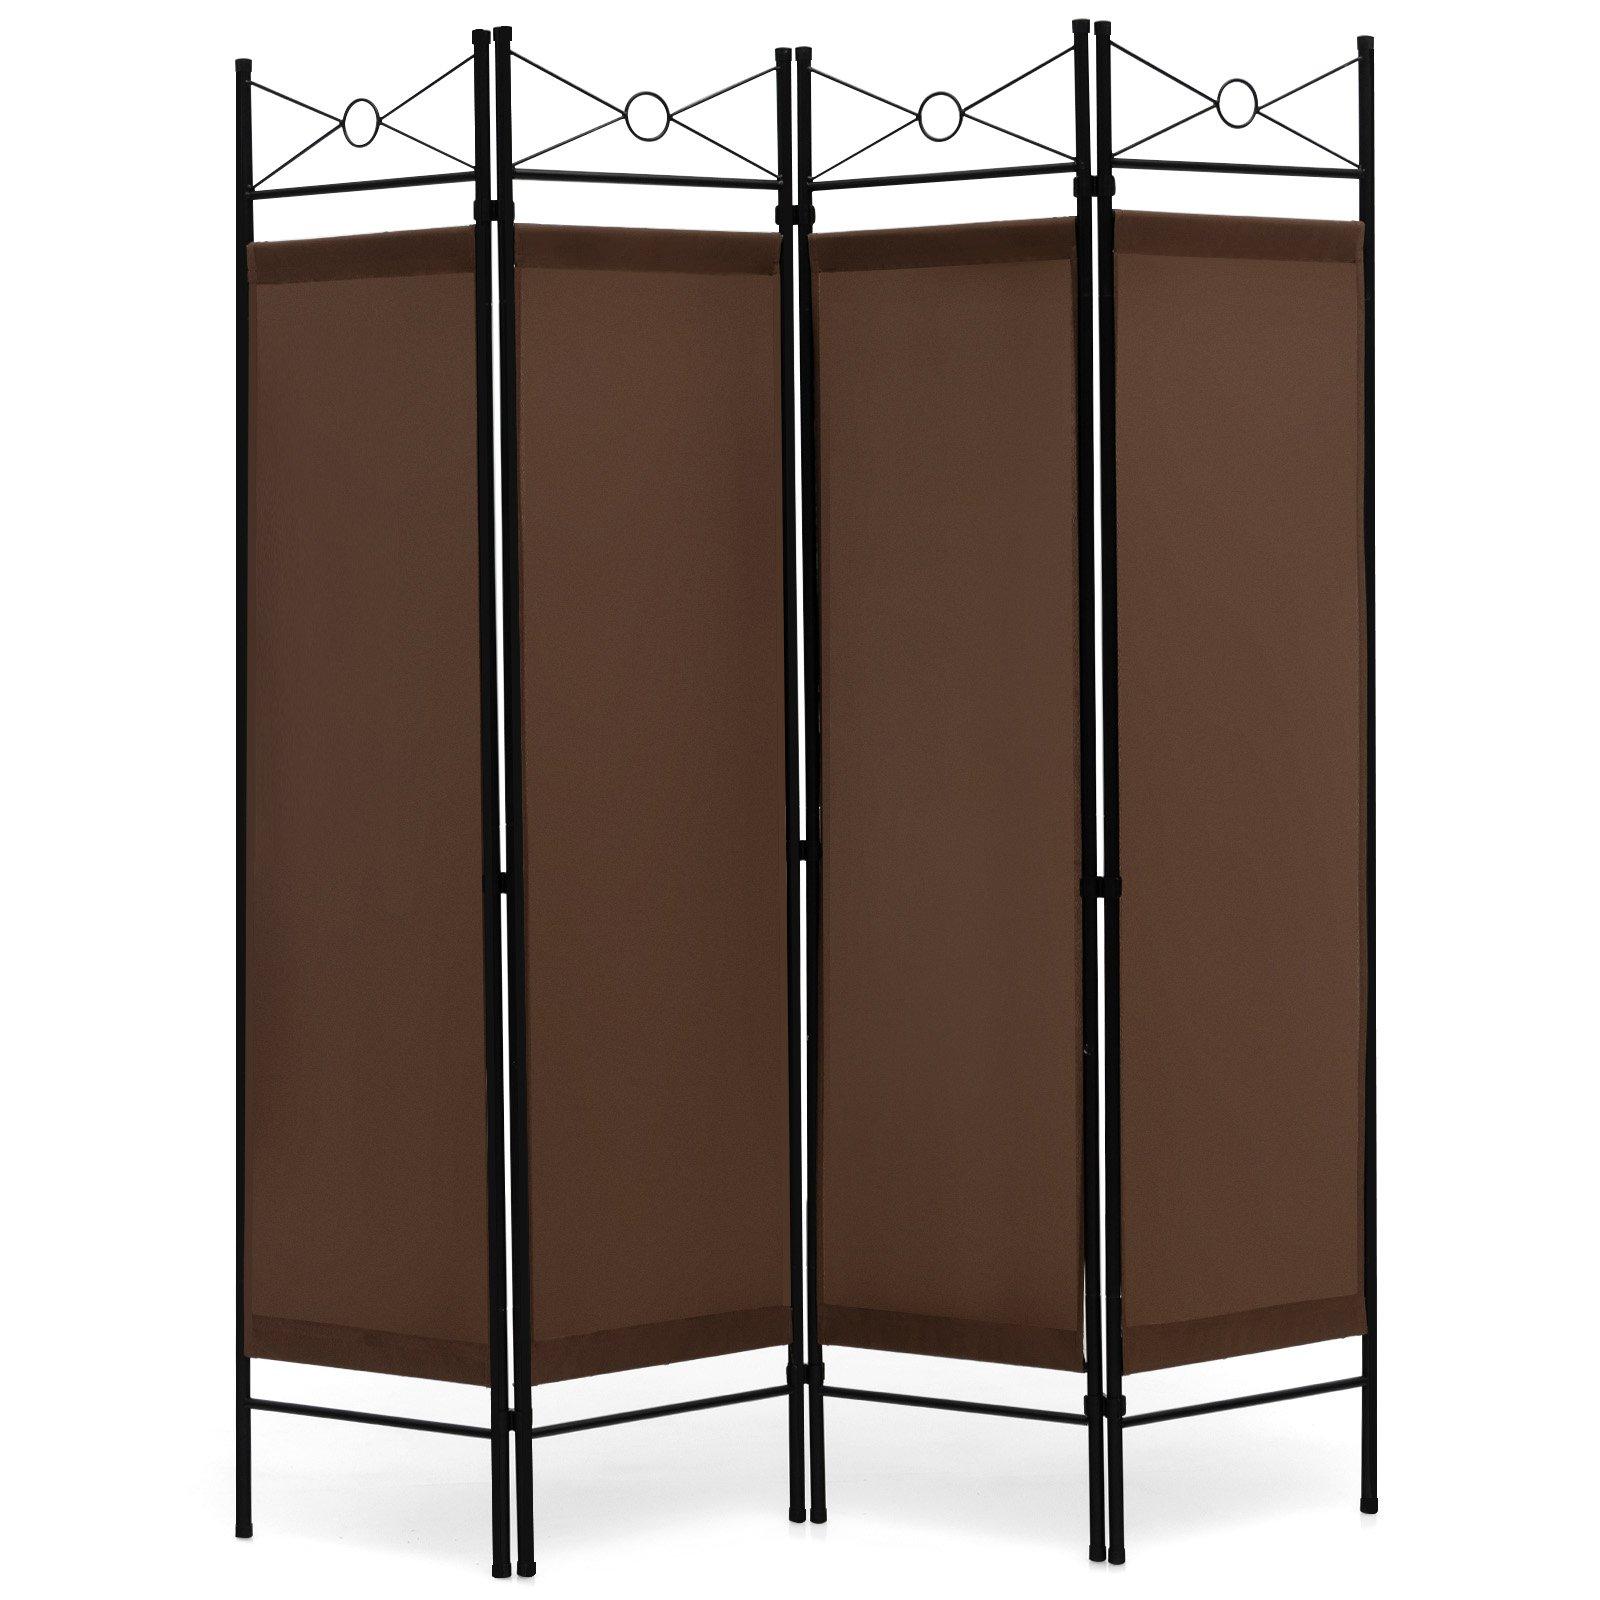 4 Panels Folding Room Divider Lightweight Wall Partition 182CM Privacy Screen